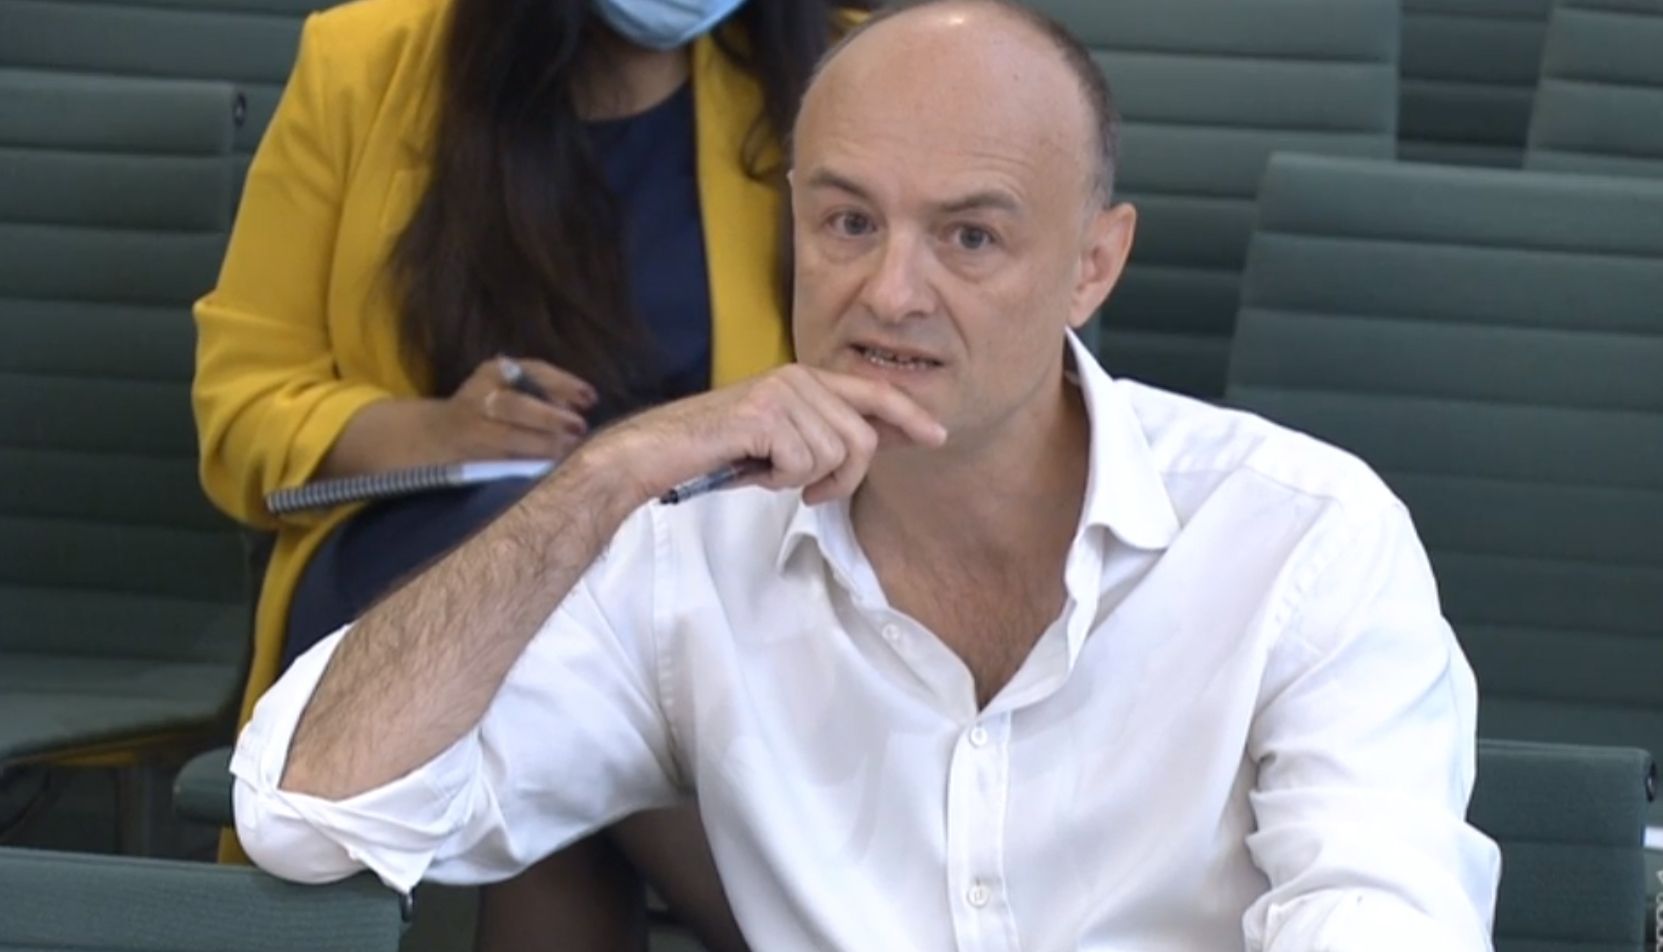 Dominic Cummings, former Chief Adviser to Prime Minister Boris Johnson, giving evidence to a joint inquiry of the Commons Health and Social Care and Science and Technology Committees on the subject of Coronavirus.